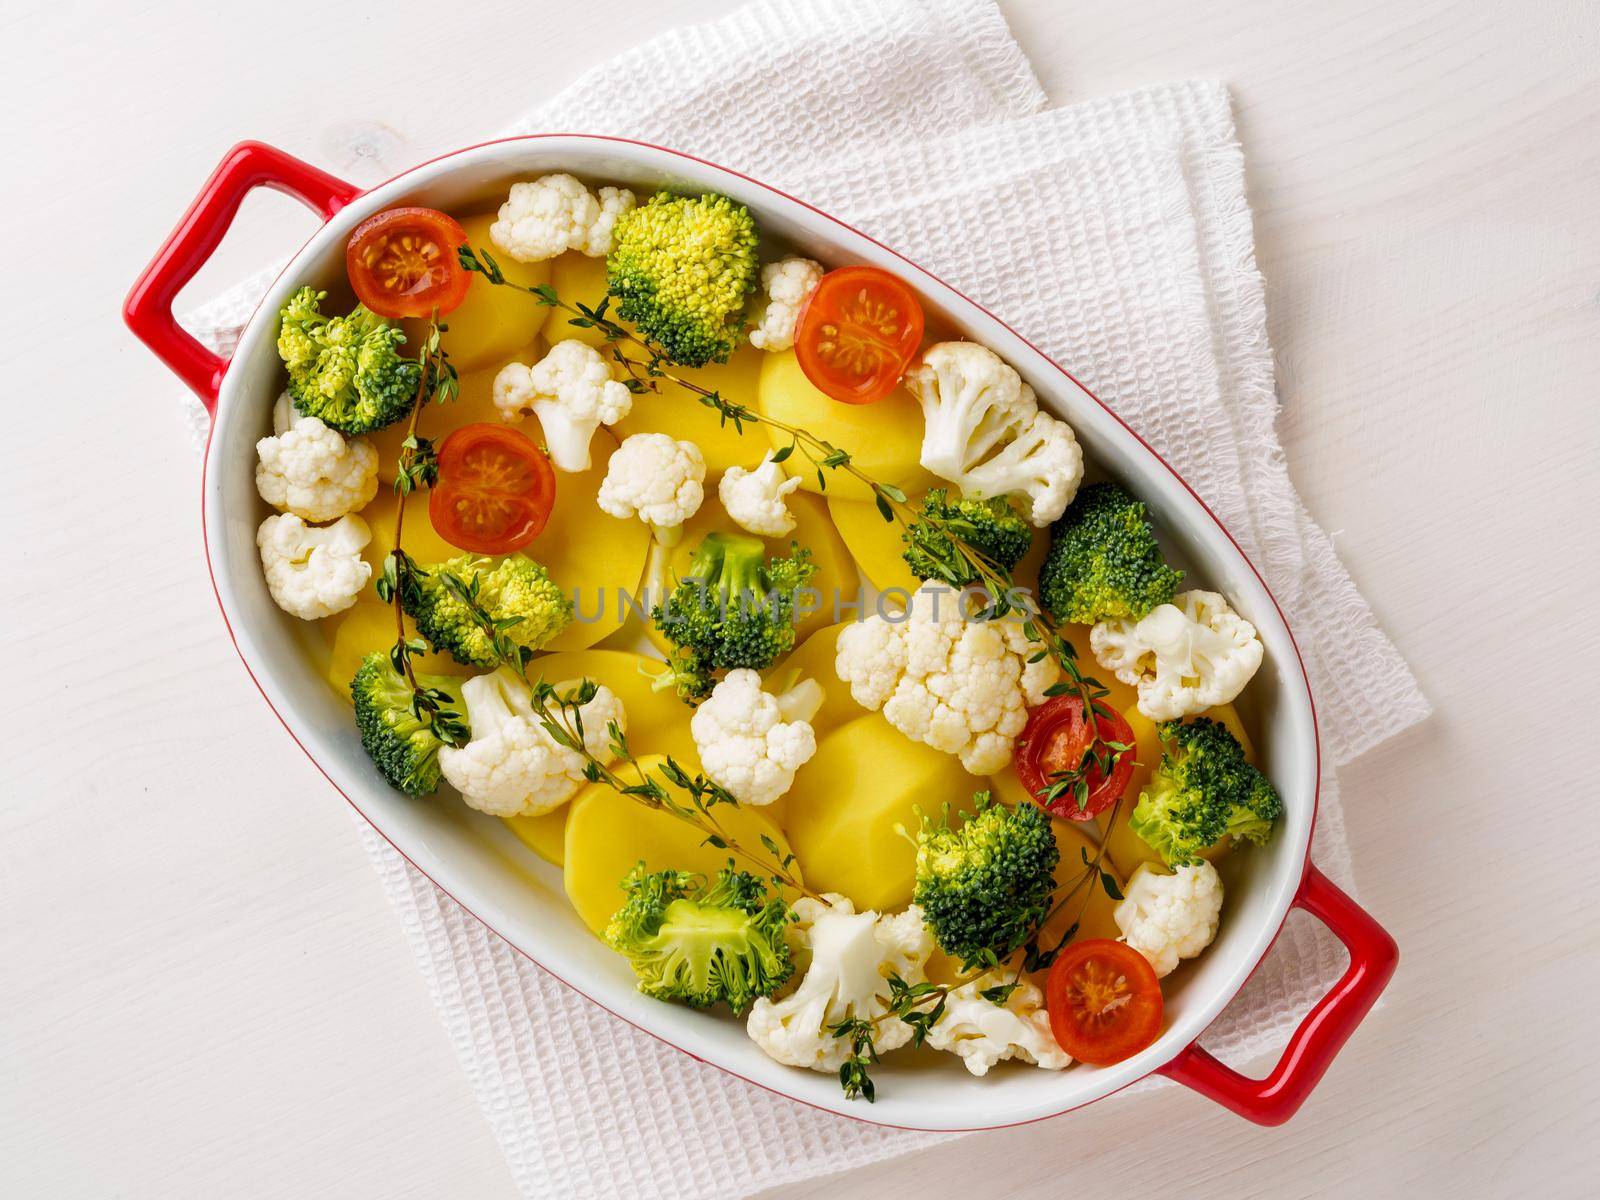 Dietary vegetarian dish of raw mixed vegetables - potatoes, cauliflower, broccoli, tomatoes, thyme, seasonings. Healthy diet. Top view, empty space for the test. by NataBene